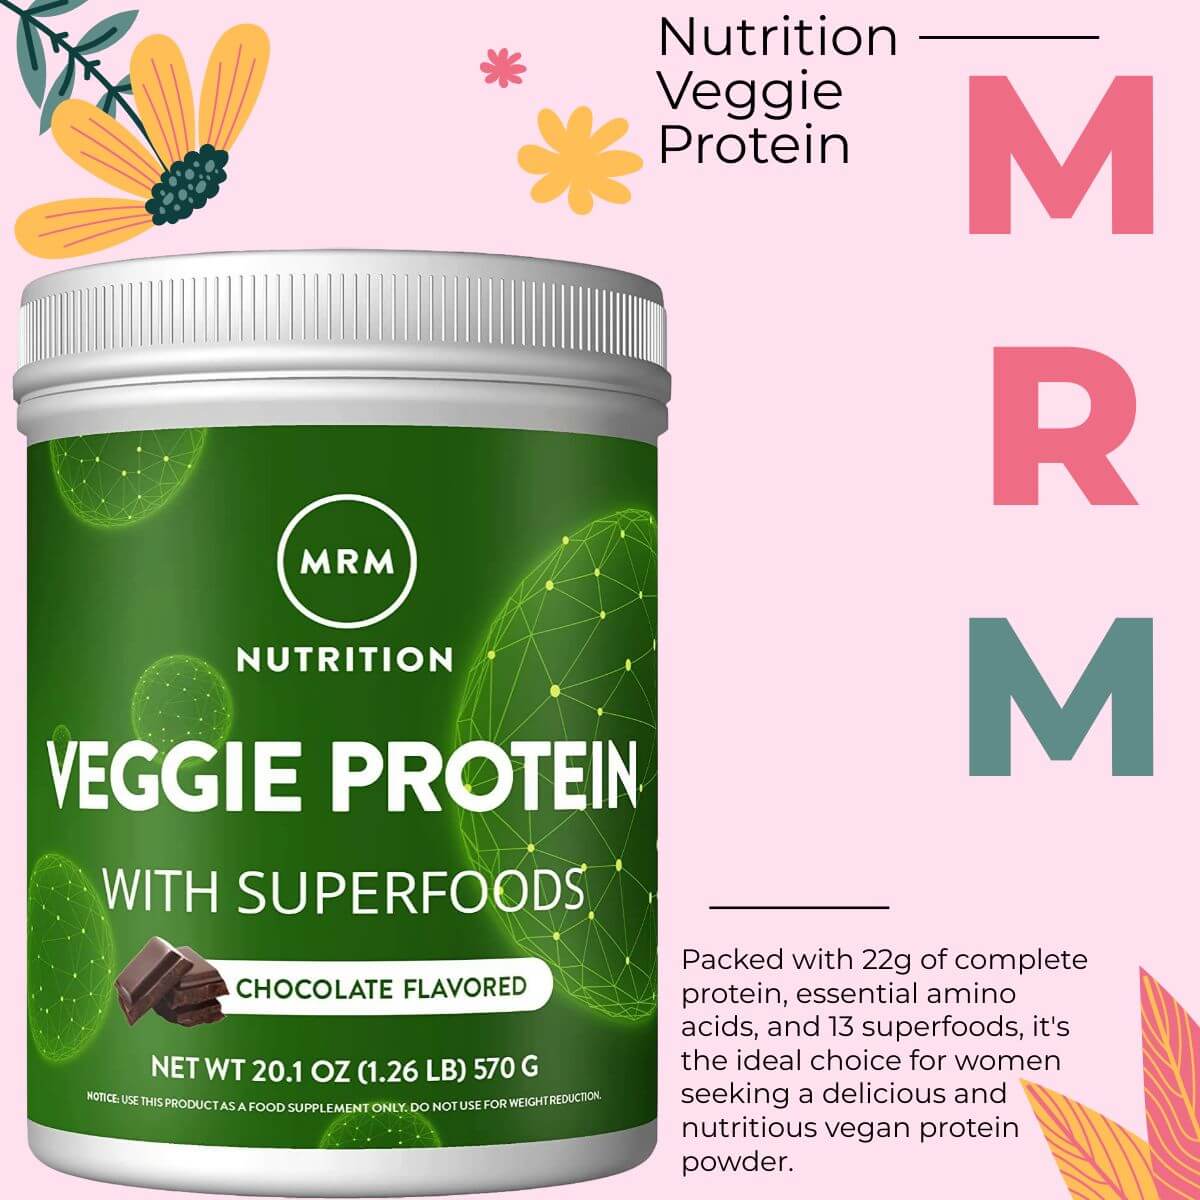 MRM Veggie Protein with Superfoods-Top Vegan Protein Powder for WomenDiscover MRM Nutrition's Veggie Protein with Superfoods. Packed with 22g of complete protein, essential amino acids, and 13 superfoods, it's ideal for women seeking a delicious and nutritious vegan protein powder.